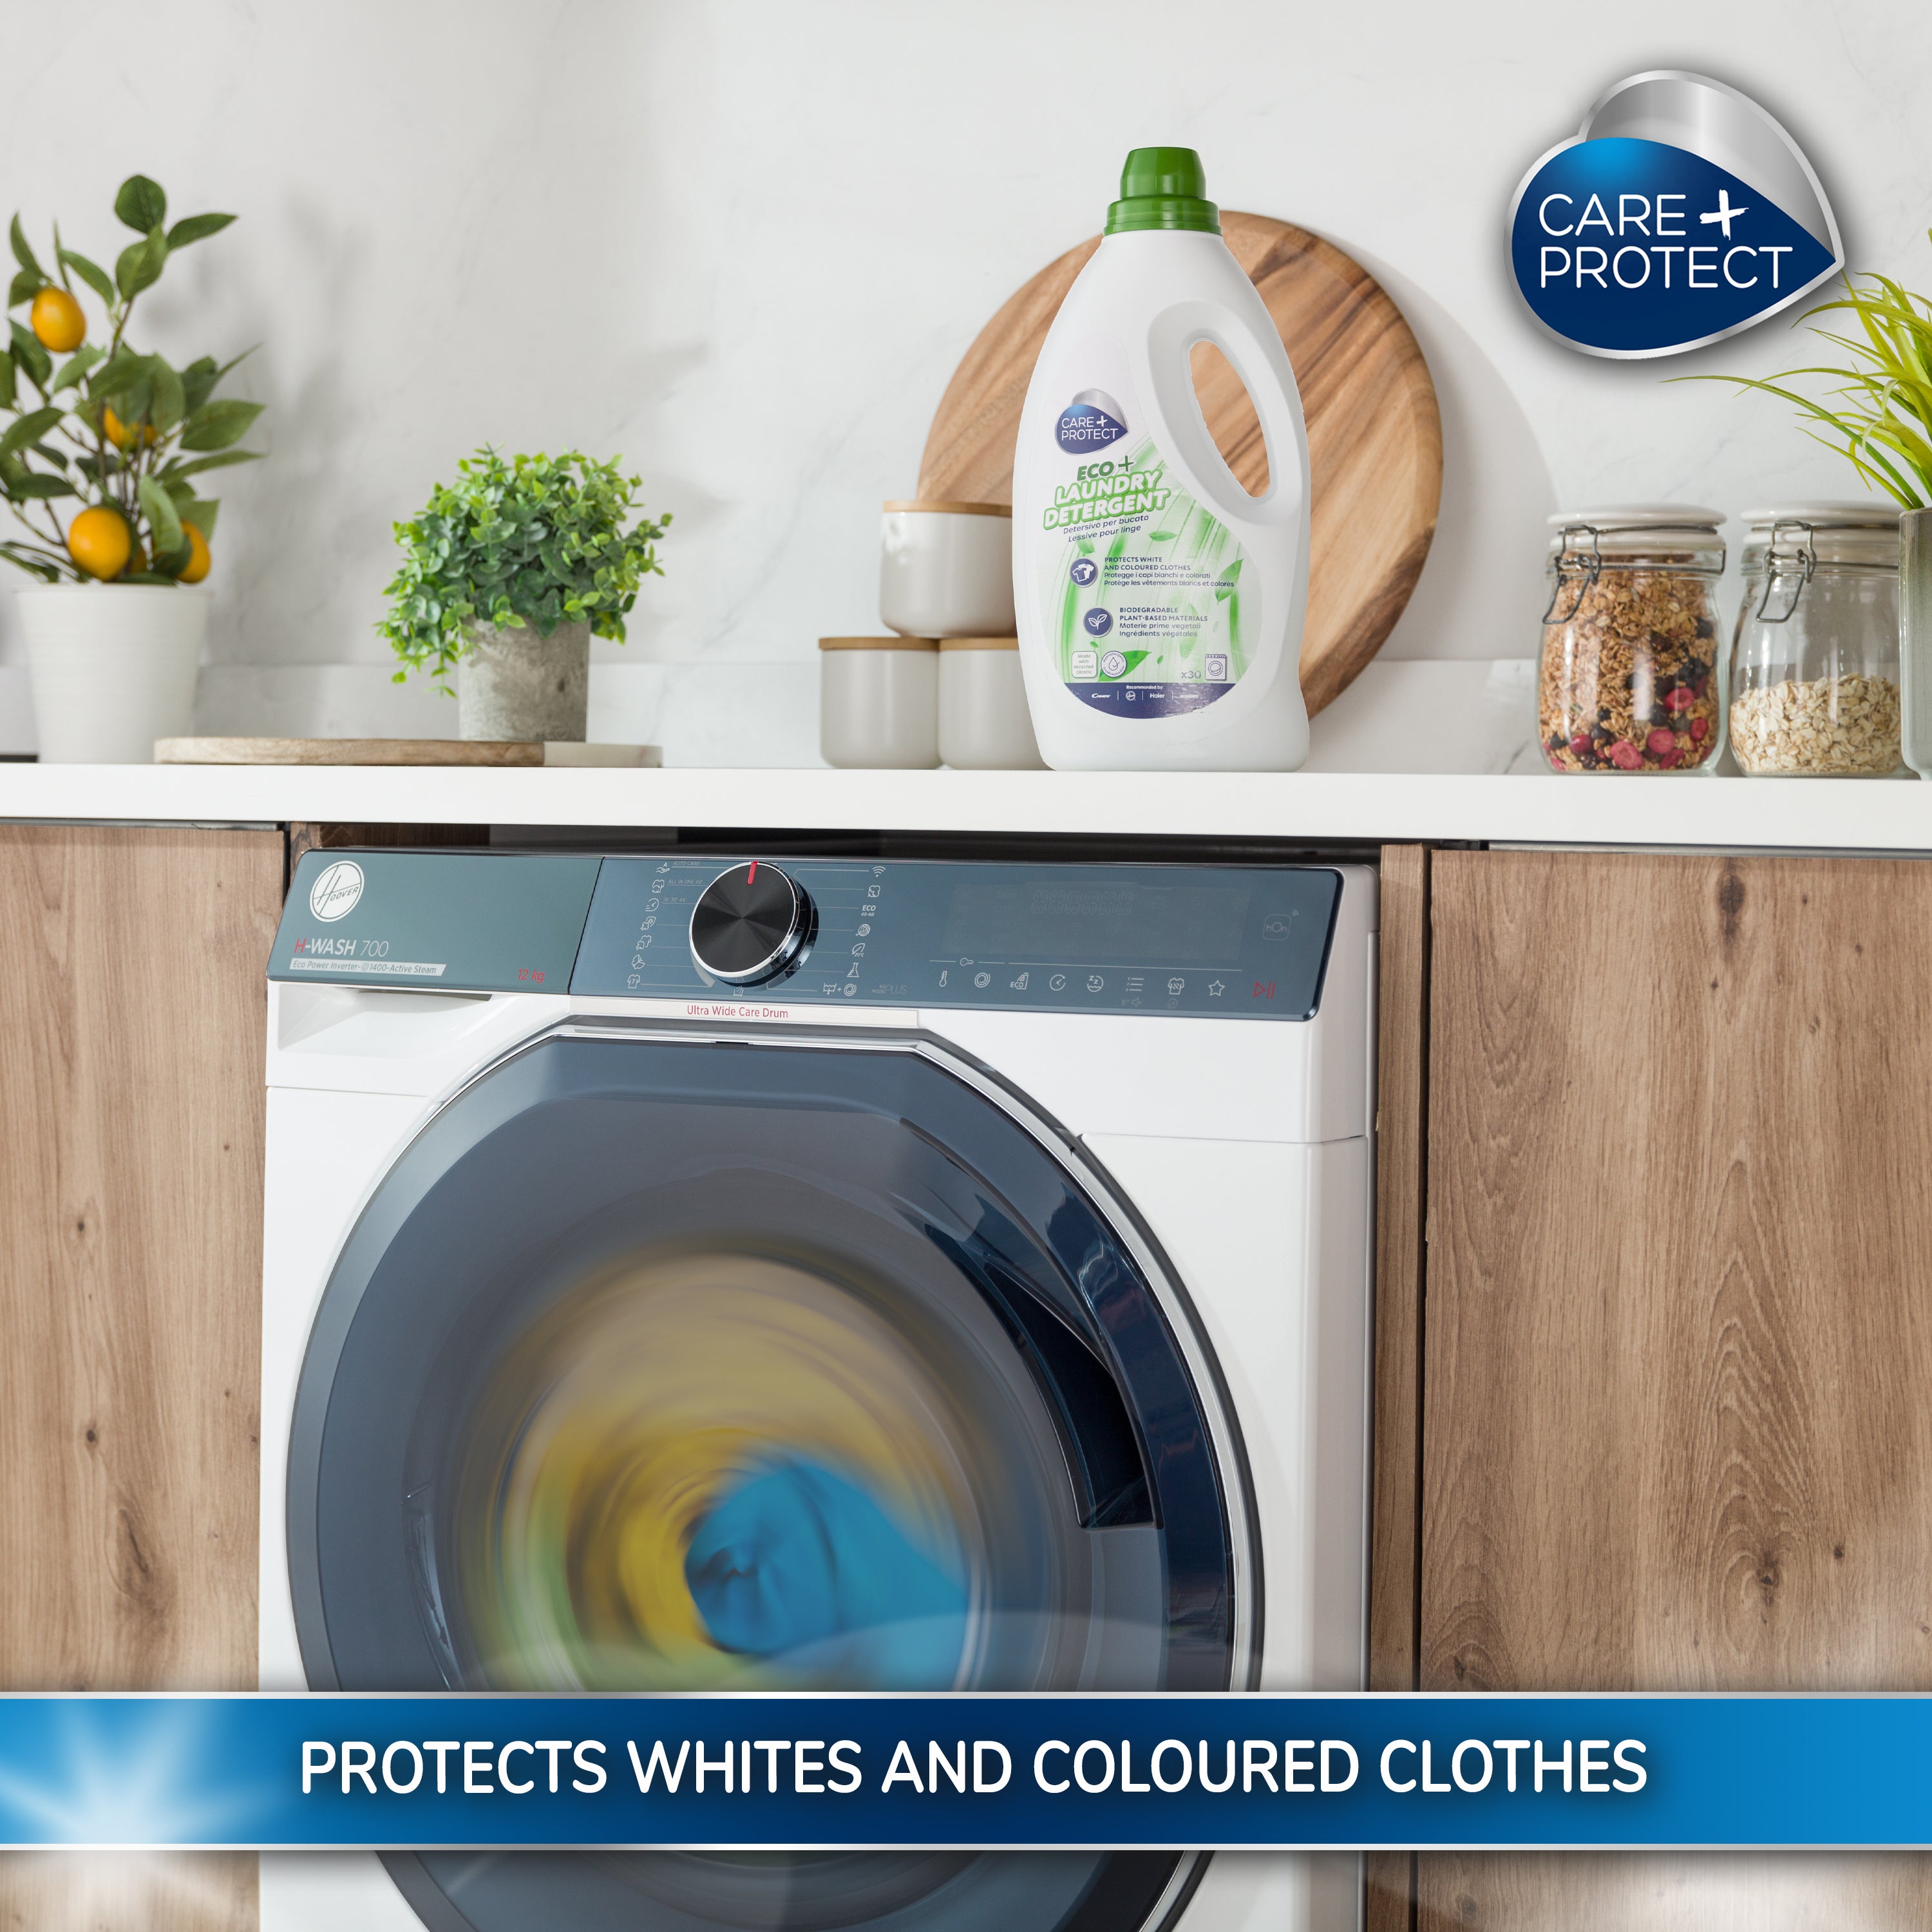 CARE + PROTECT ECO+ Laundry Detergent, for Machine and Hand Washing, White & Coloured Clothes, Effective even at 30° and in Rapid Cycles, Ecolabel Certified, Hypoallergenic, 1500ml for Upto 30 Washes